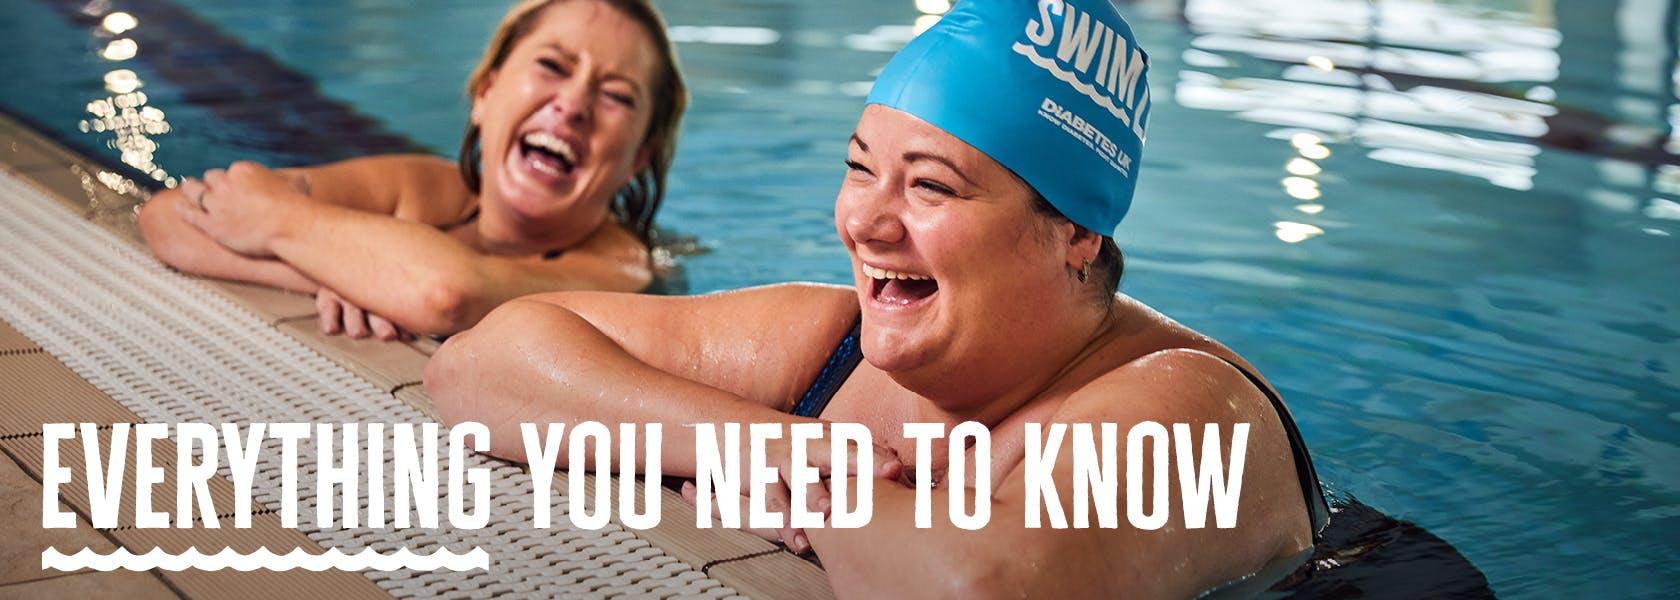 Two swimmers smiling in the pool taking on Swim22. One wearing a Swim22 cap